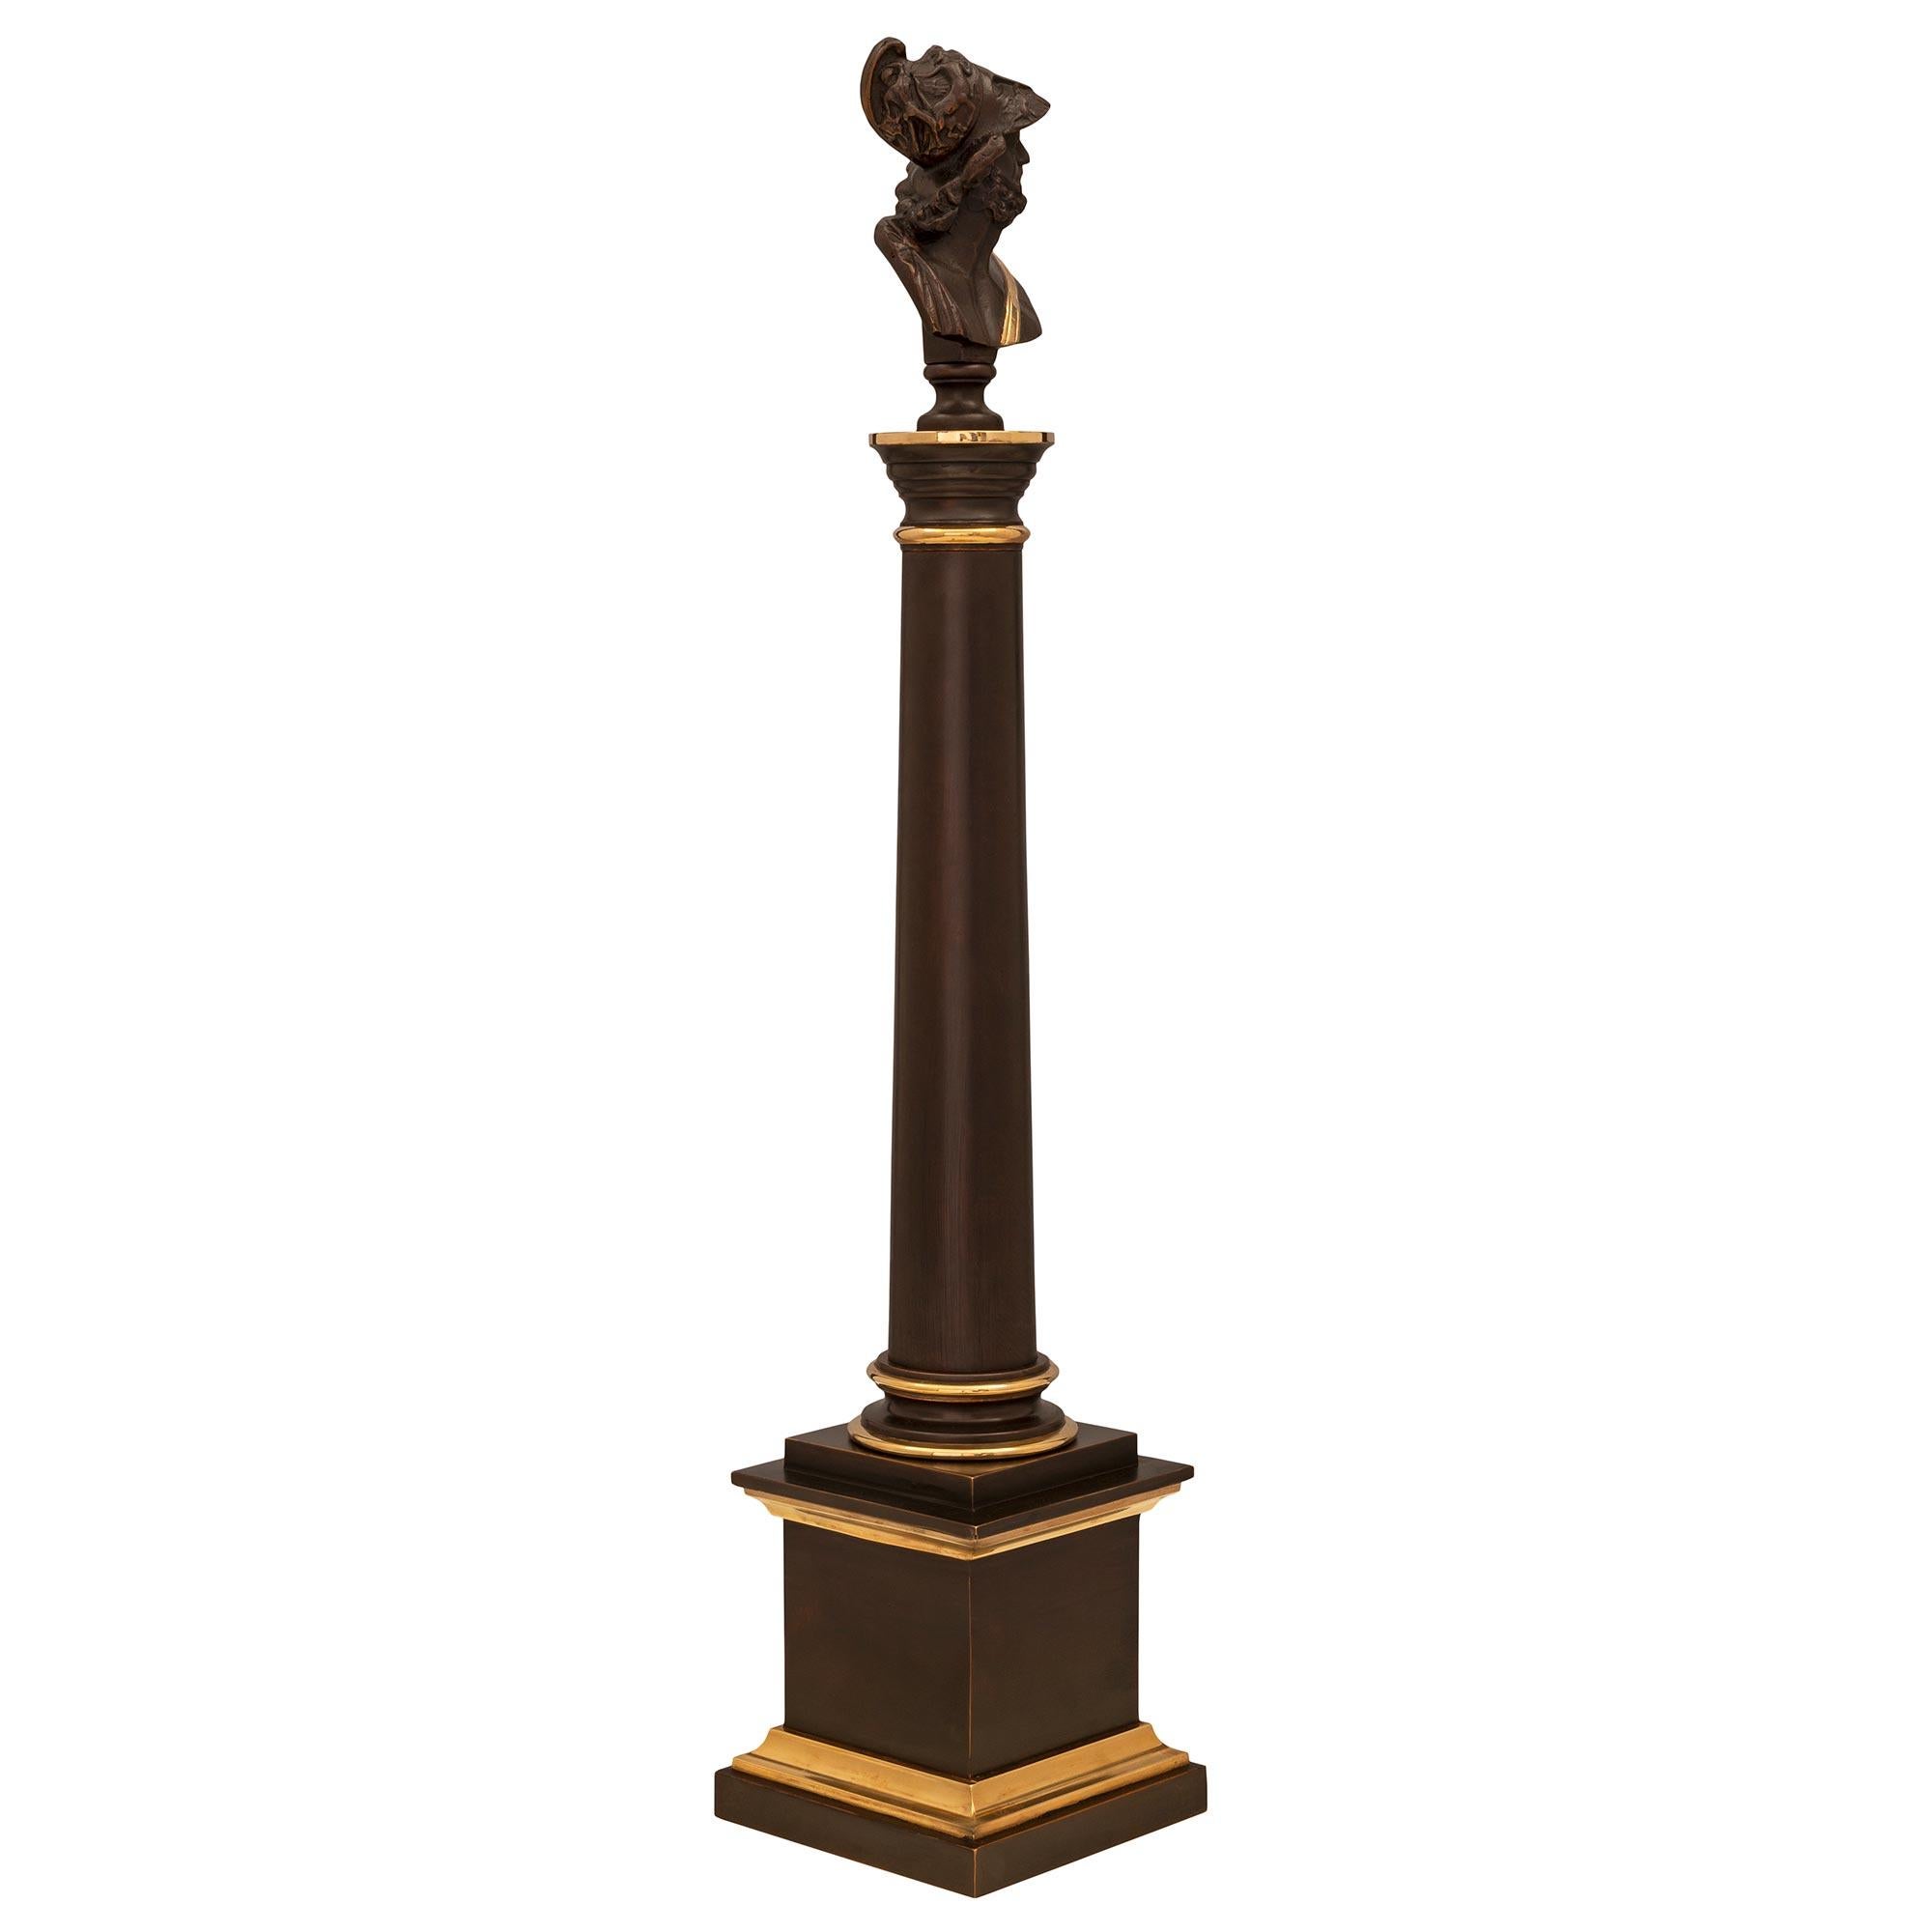 An attractive and most decorative true pair of French 19th century Neoclassical st. Grand Tour patinated bronze and ormolu columns. Each column is raised by an elegant square base with a beautiful mottled stepped design and ormolu accents. The